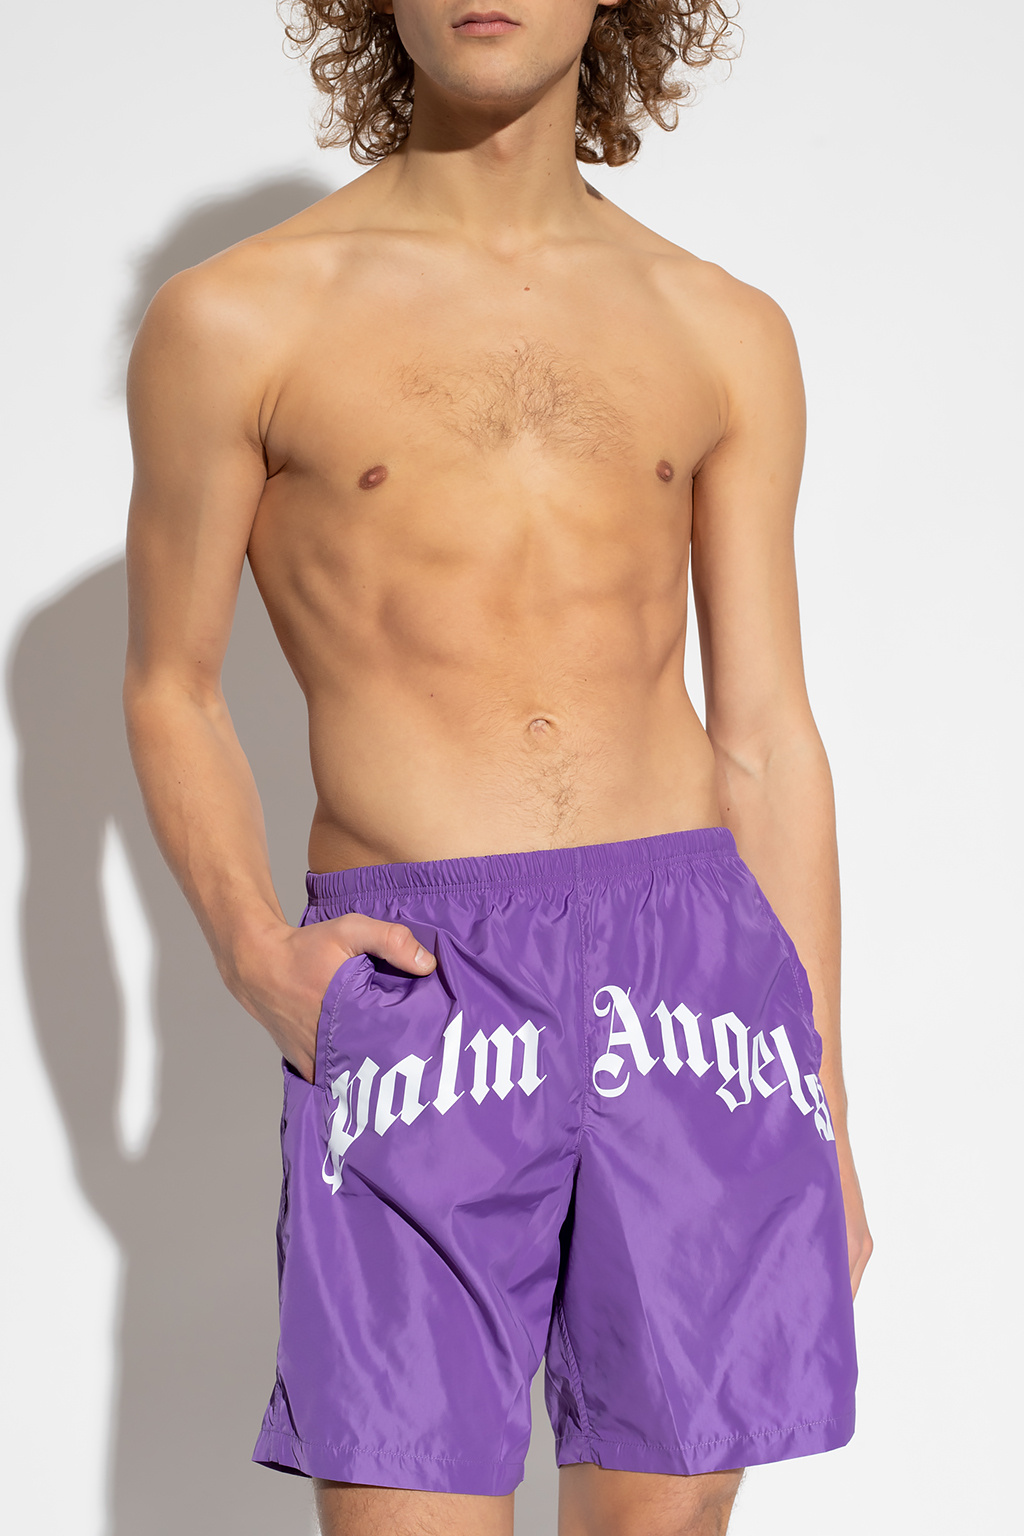 Palm Angels Swimming shorts with logo